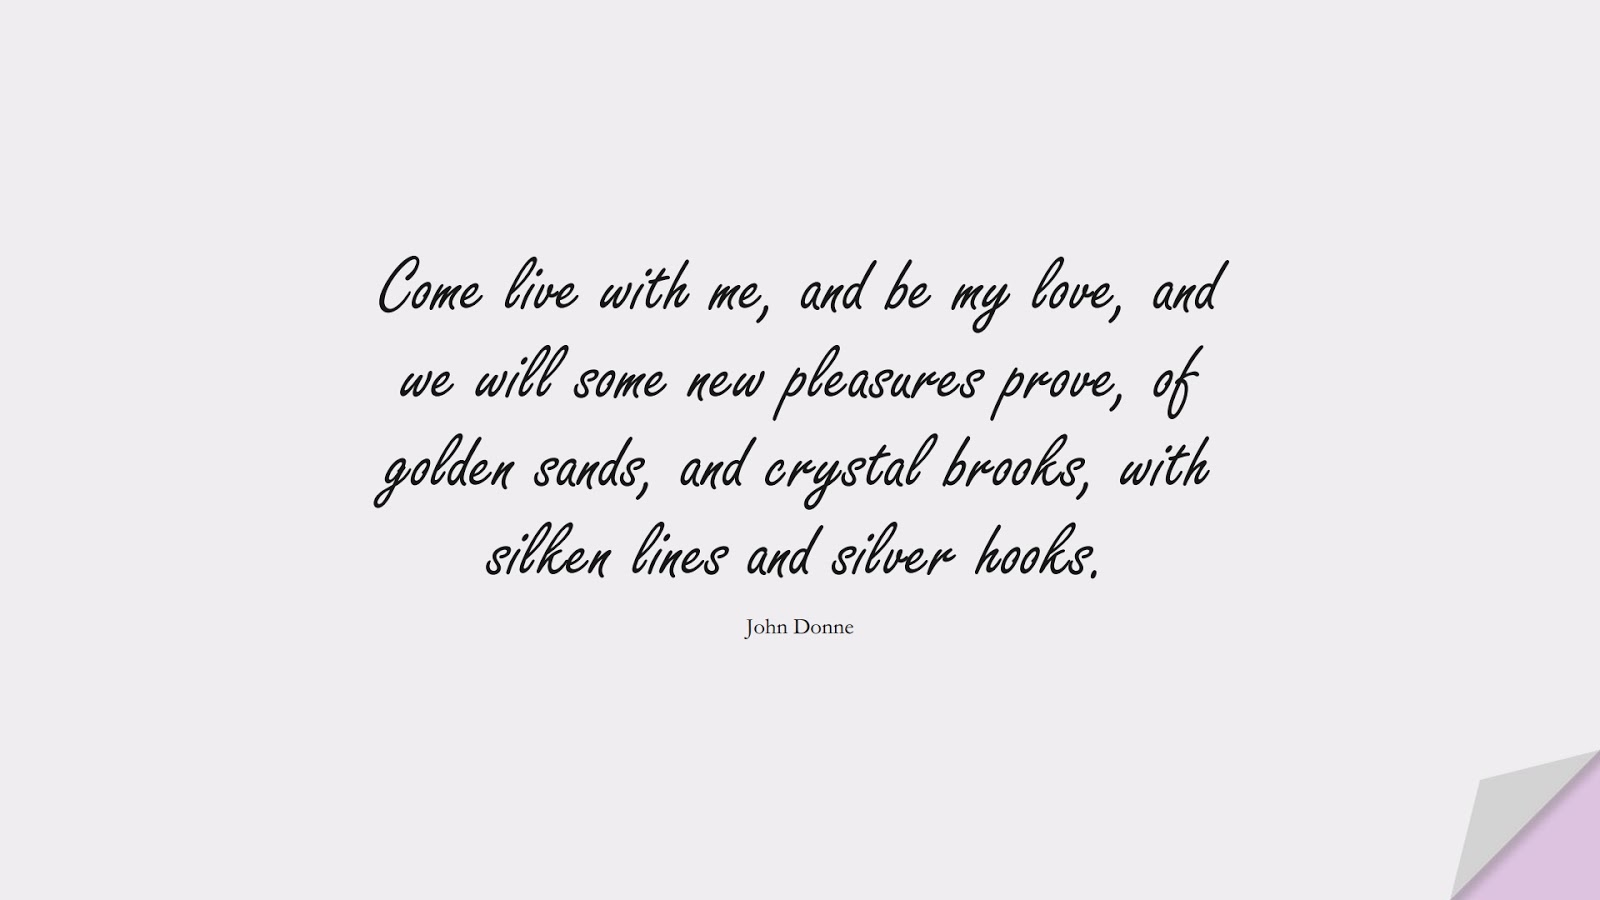 Come live with me, and be my love, and we will some new pleasures prove, of golden sands, and crystal brooks, with silken lines and silver hooks. (John Donne);  #LoveQuotes